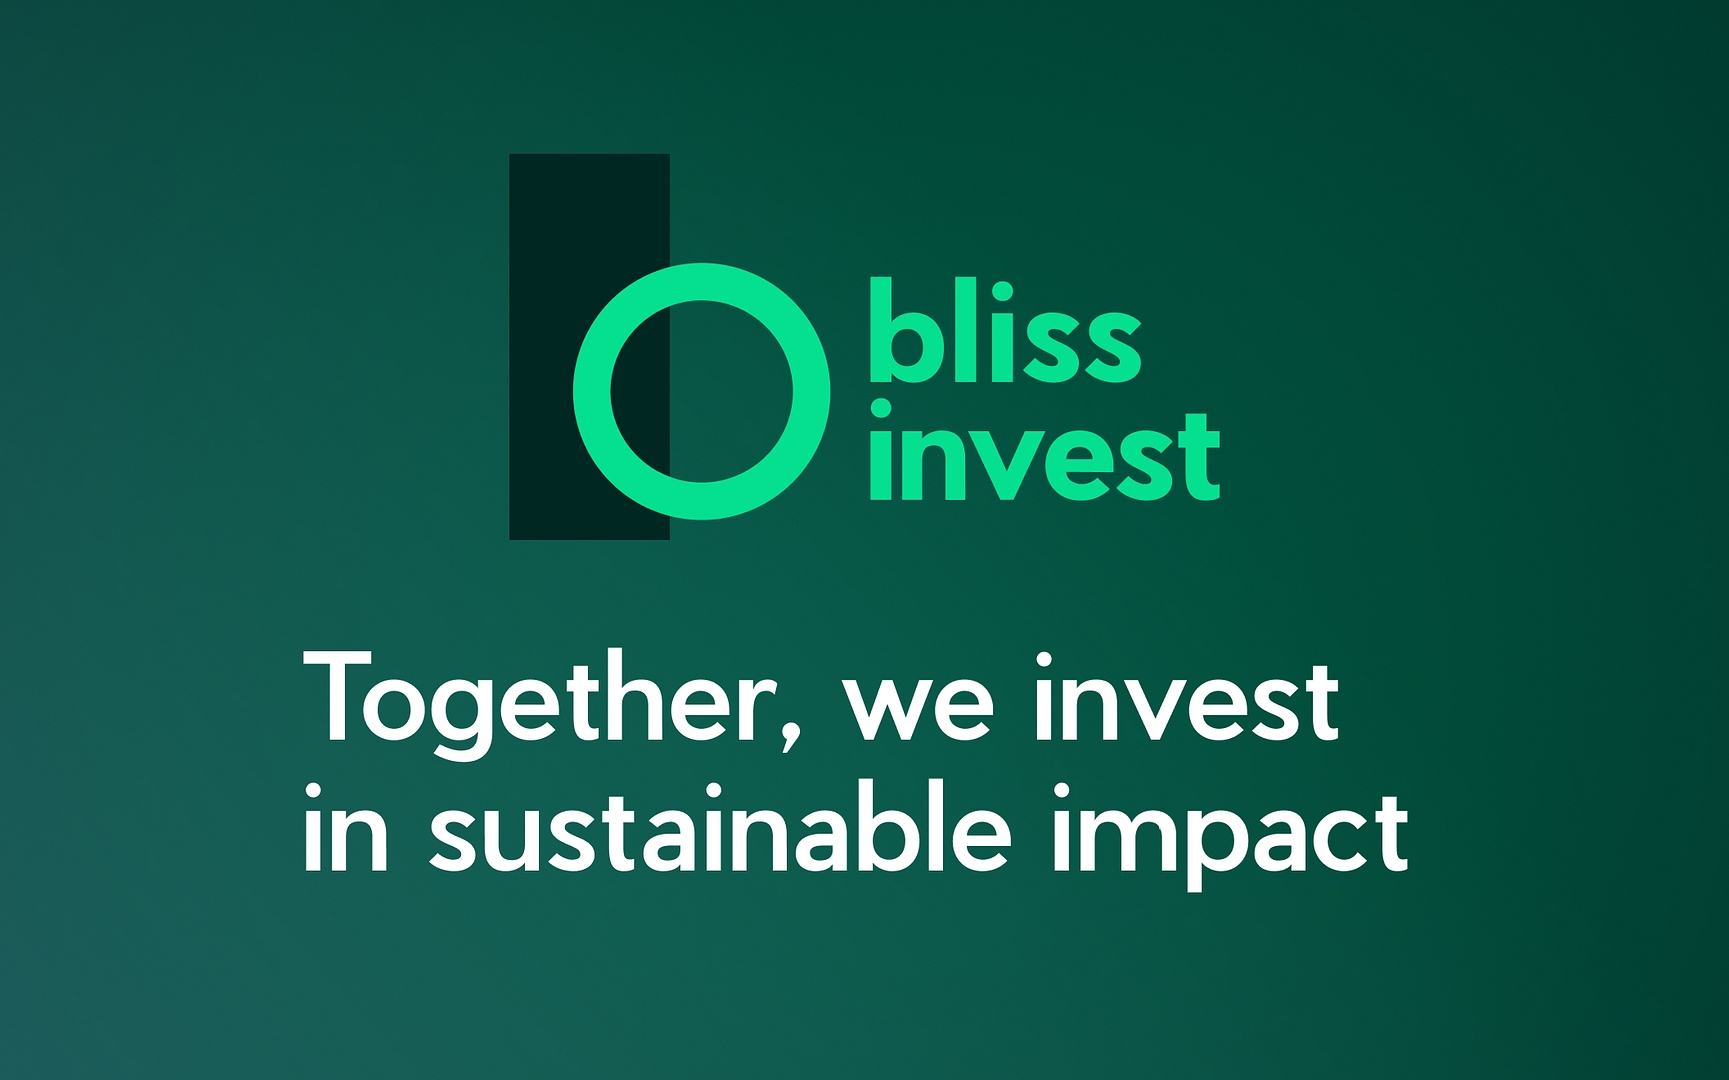 Bliss invest update thumb extended 4x